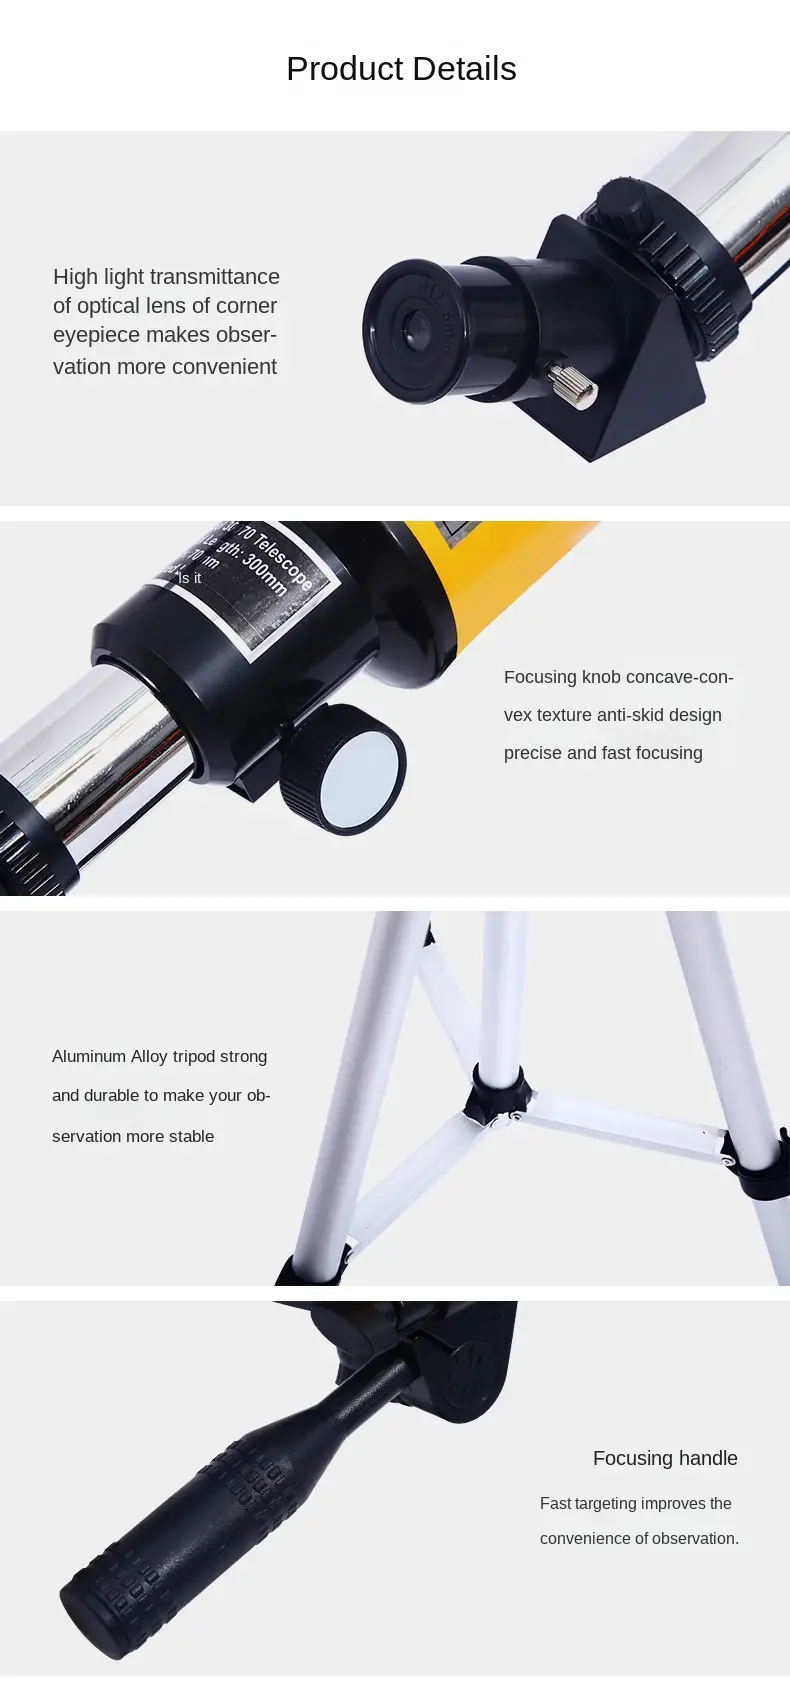 professional astronomical telescope 150 times zoom high power portable tripod night vision deep space star view moon universe details 6